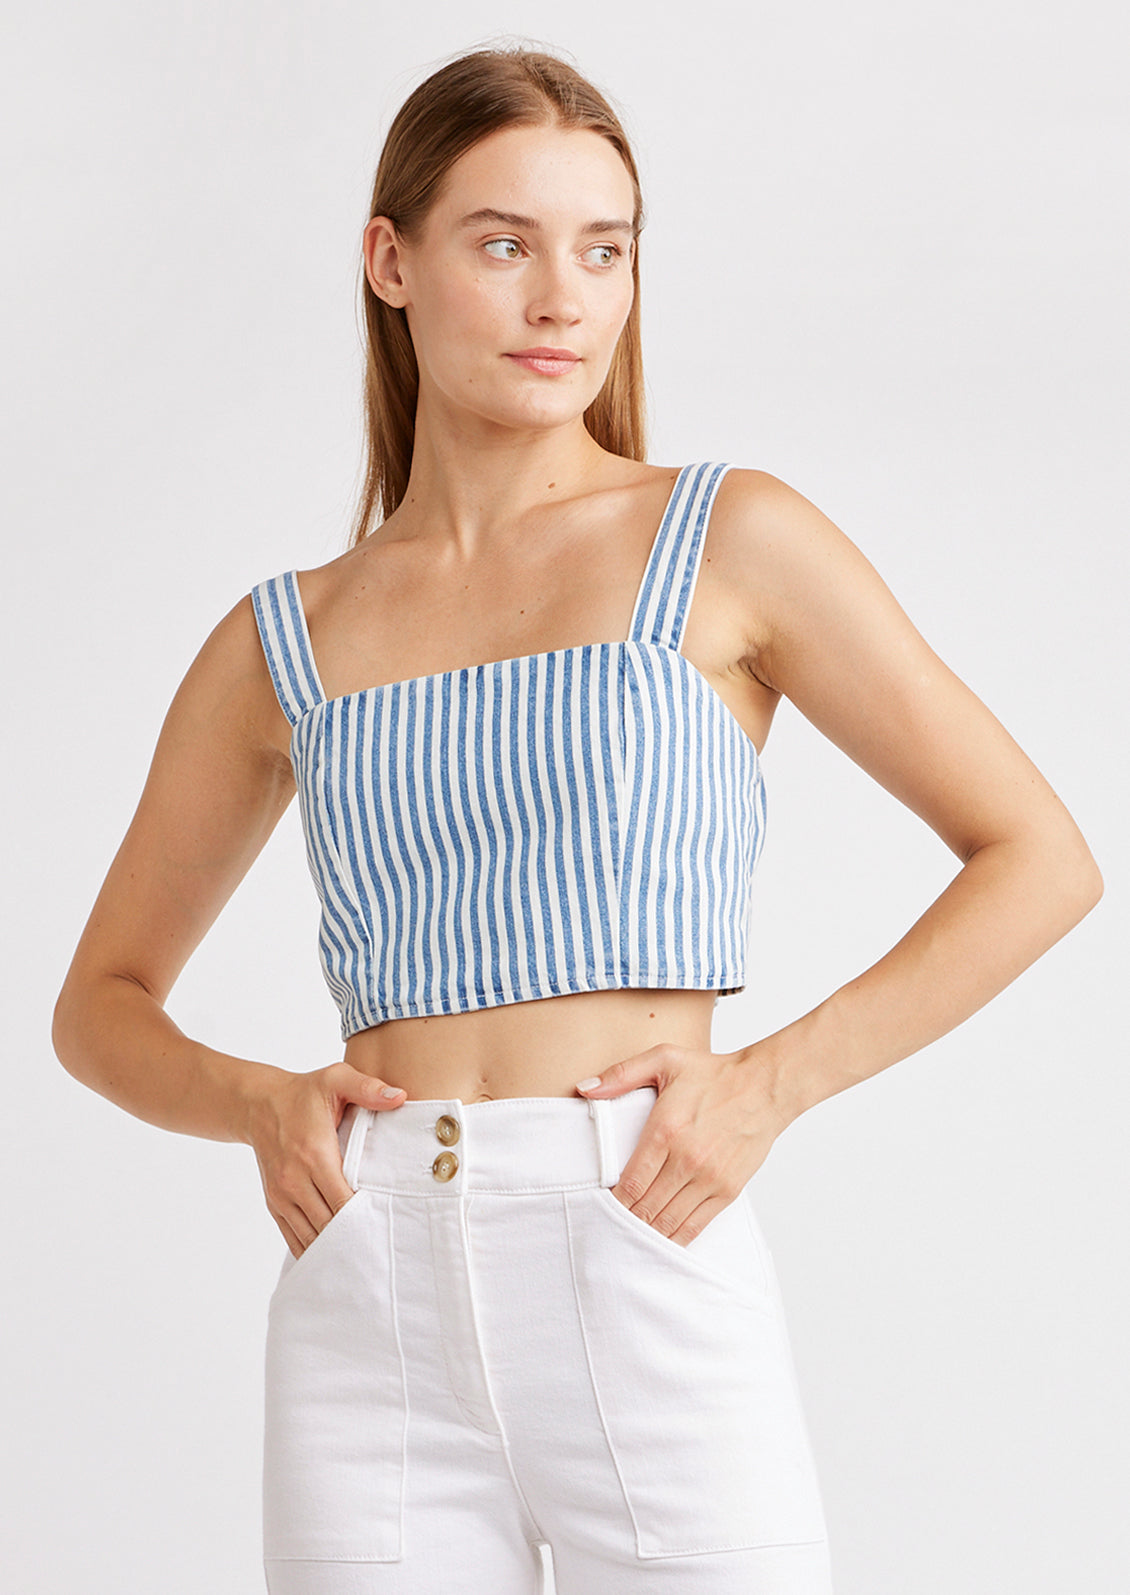 A woman wearing a square neck crop top with thick blue stripes.